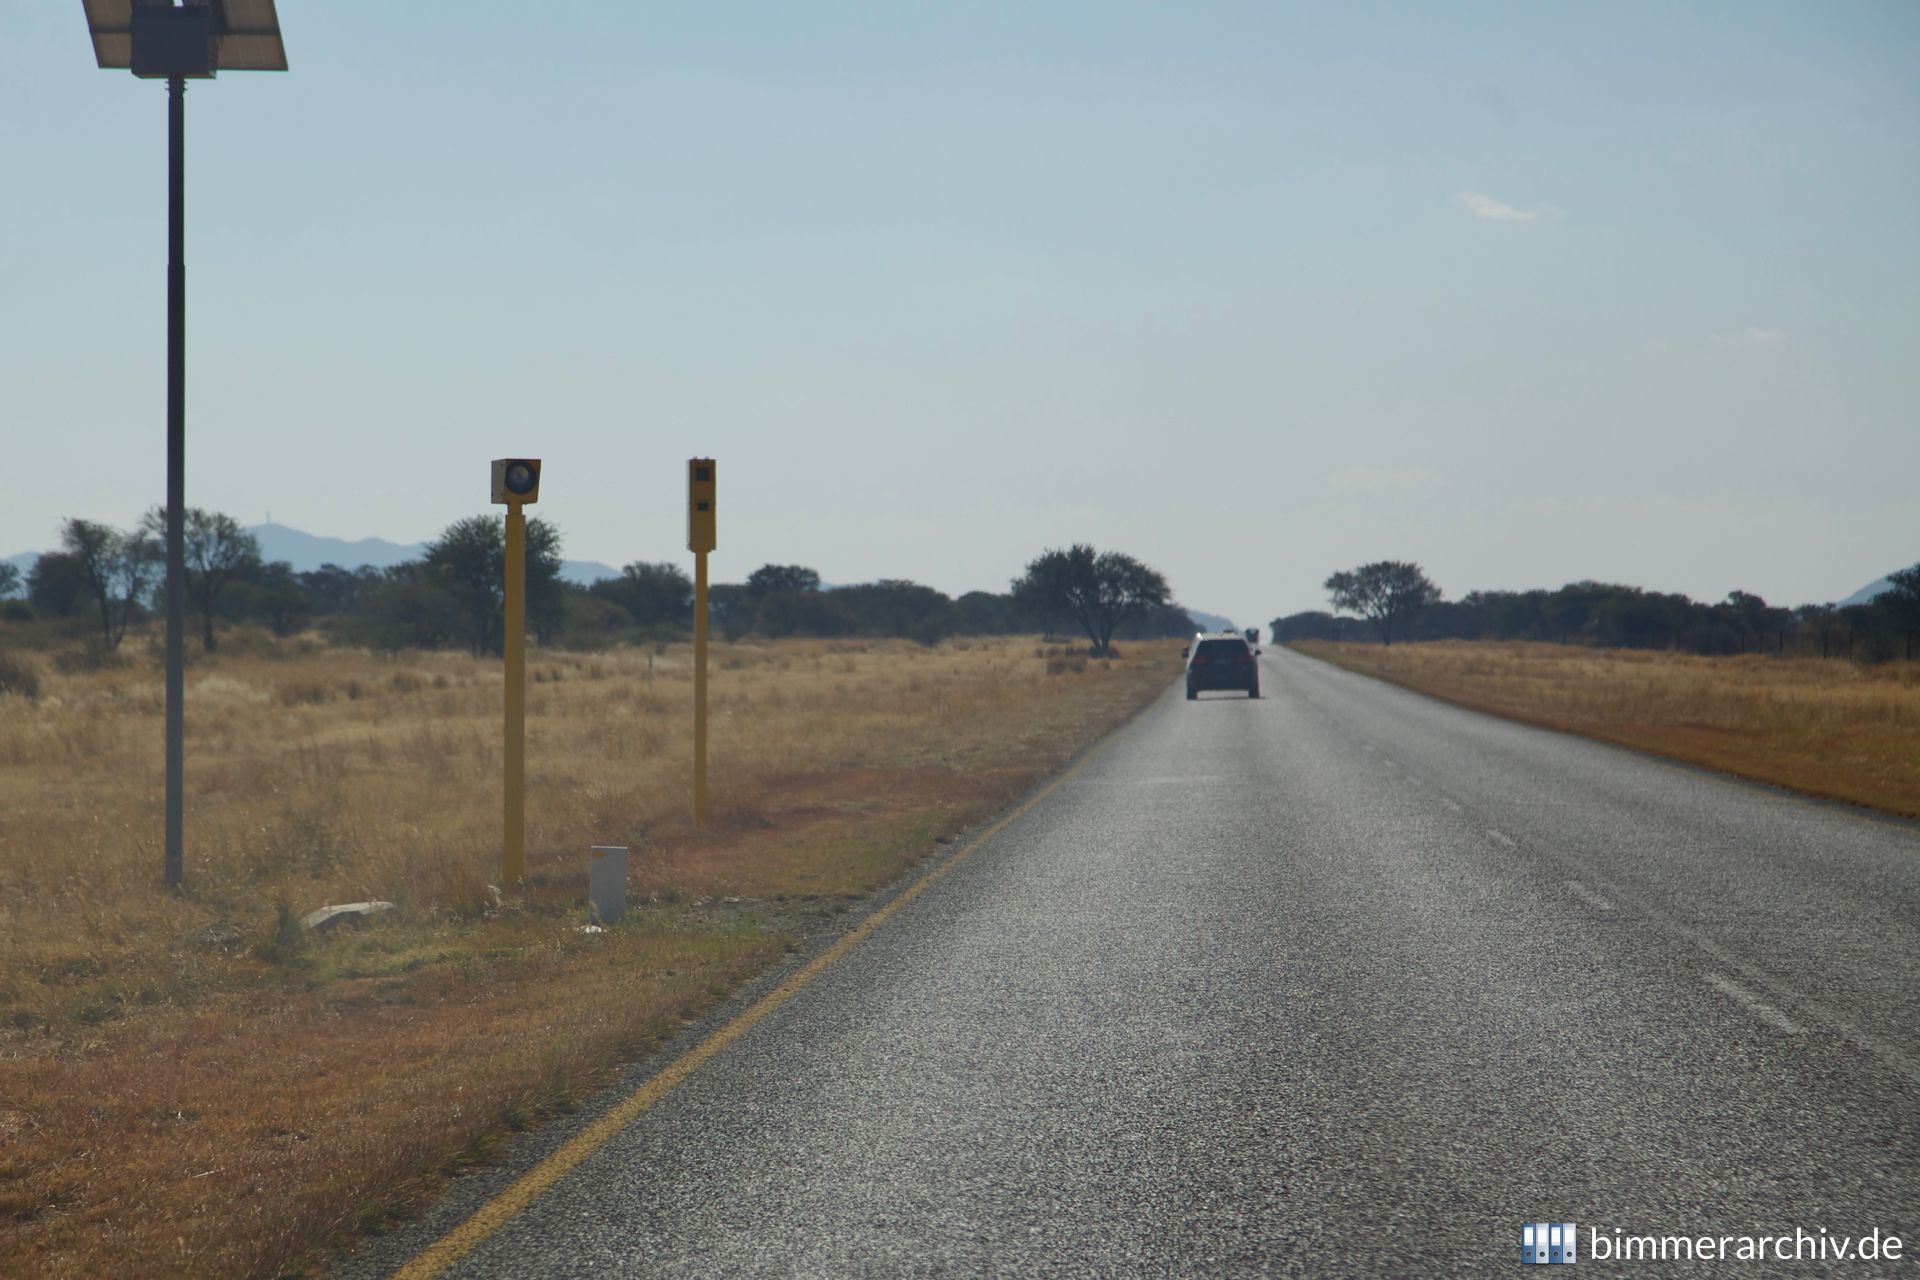 Speed camera in Namibia